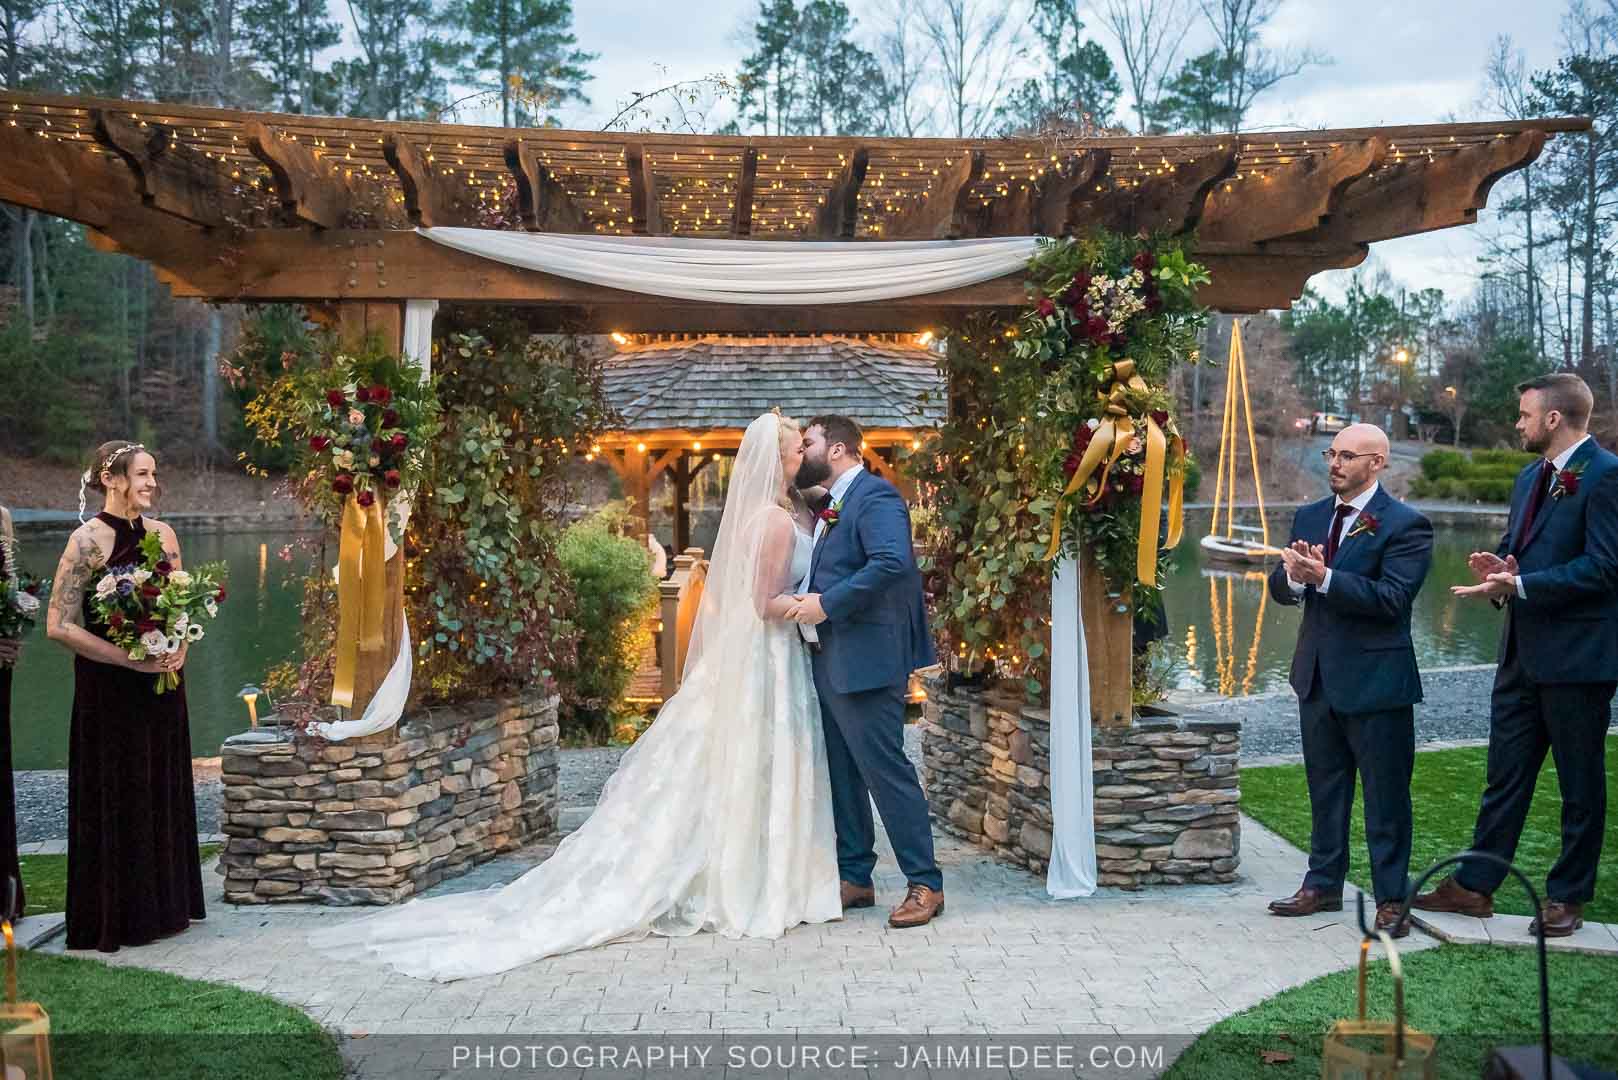 Rocky's Lake Estate Wedding Venue - Wedding ceremony - full view of ceremony site - first kiss